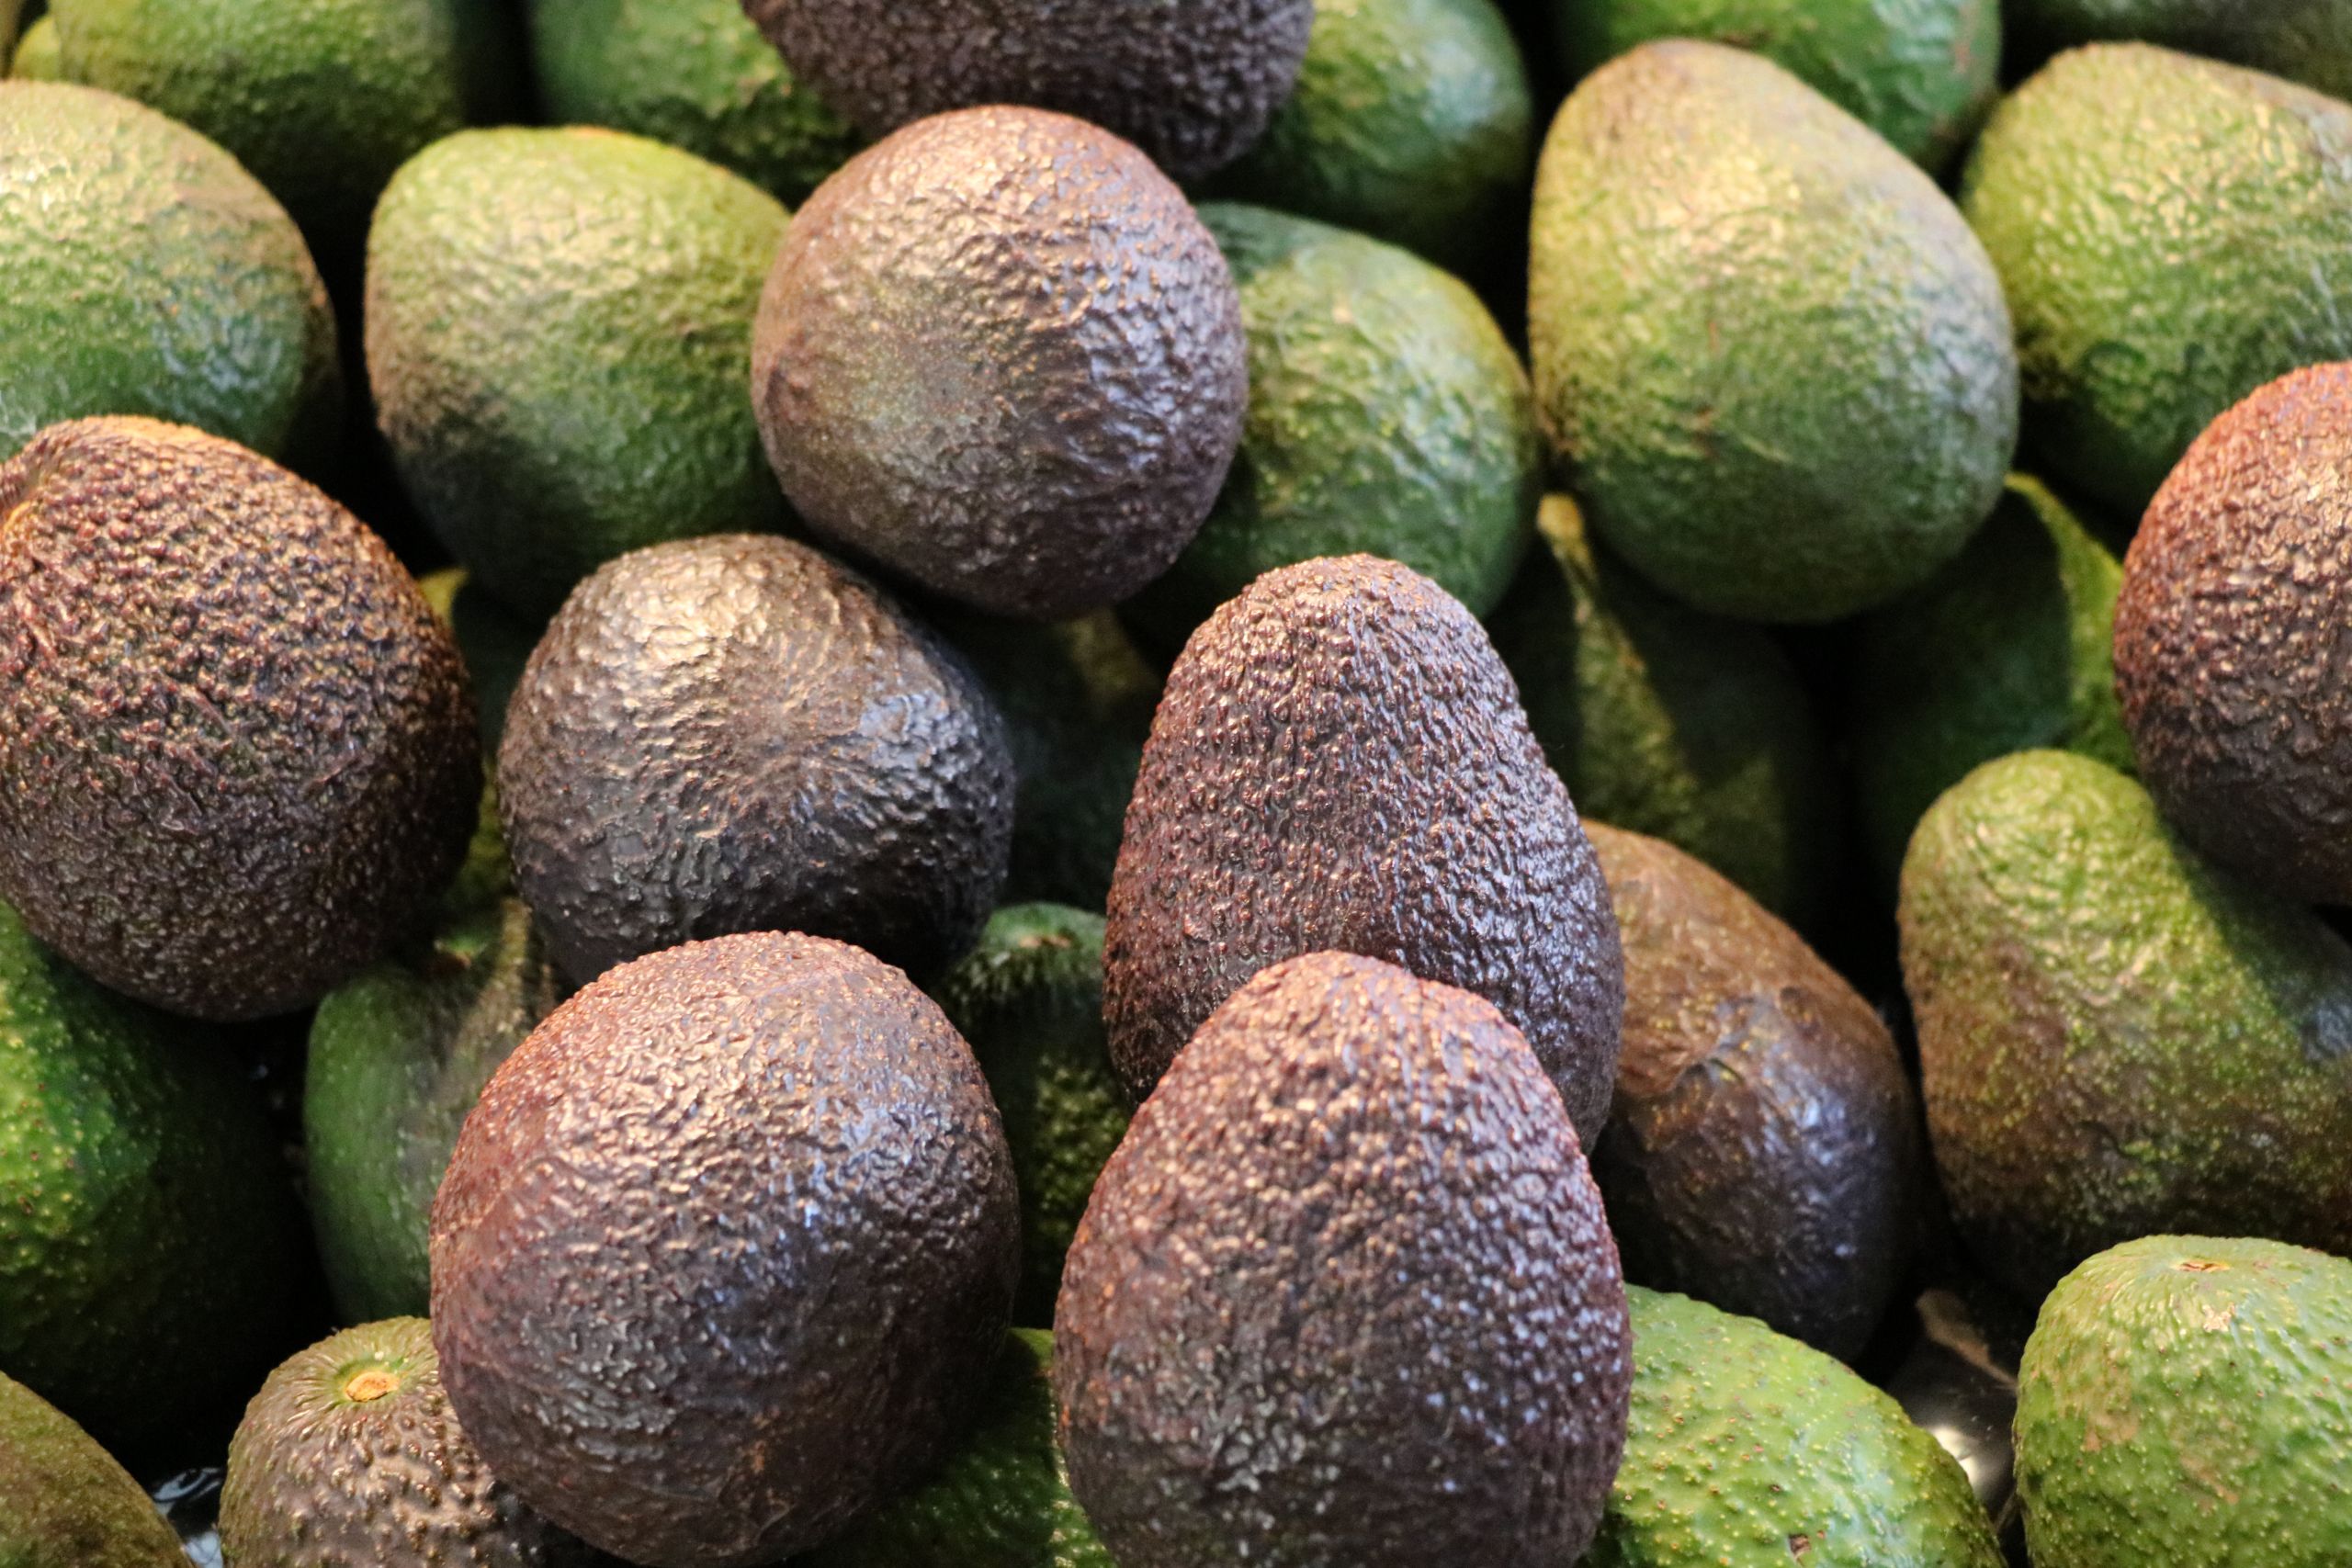 Banner image of avocados